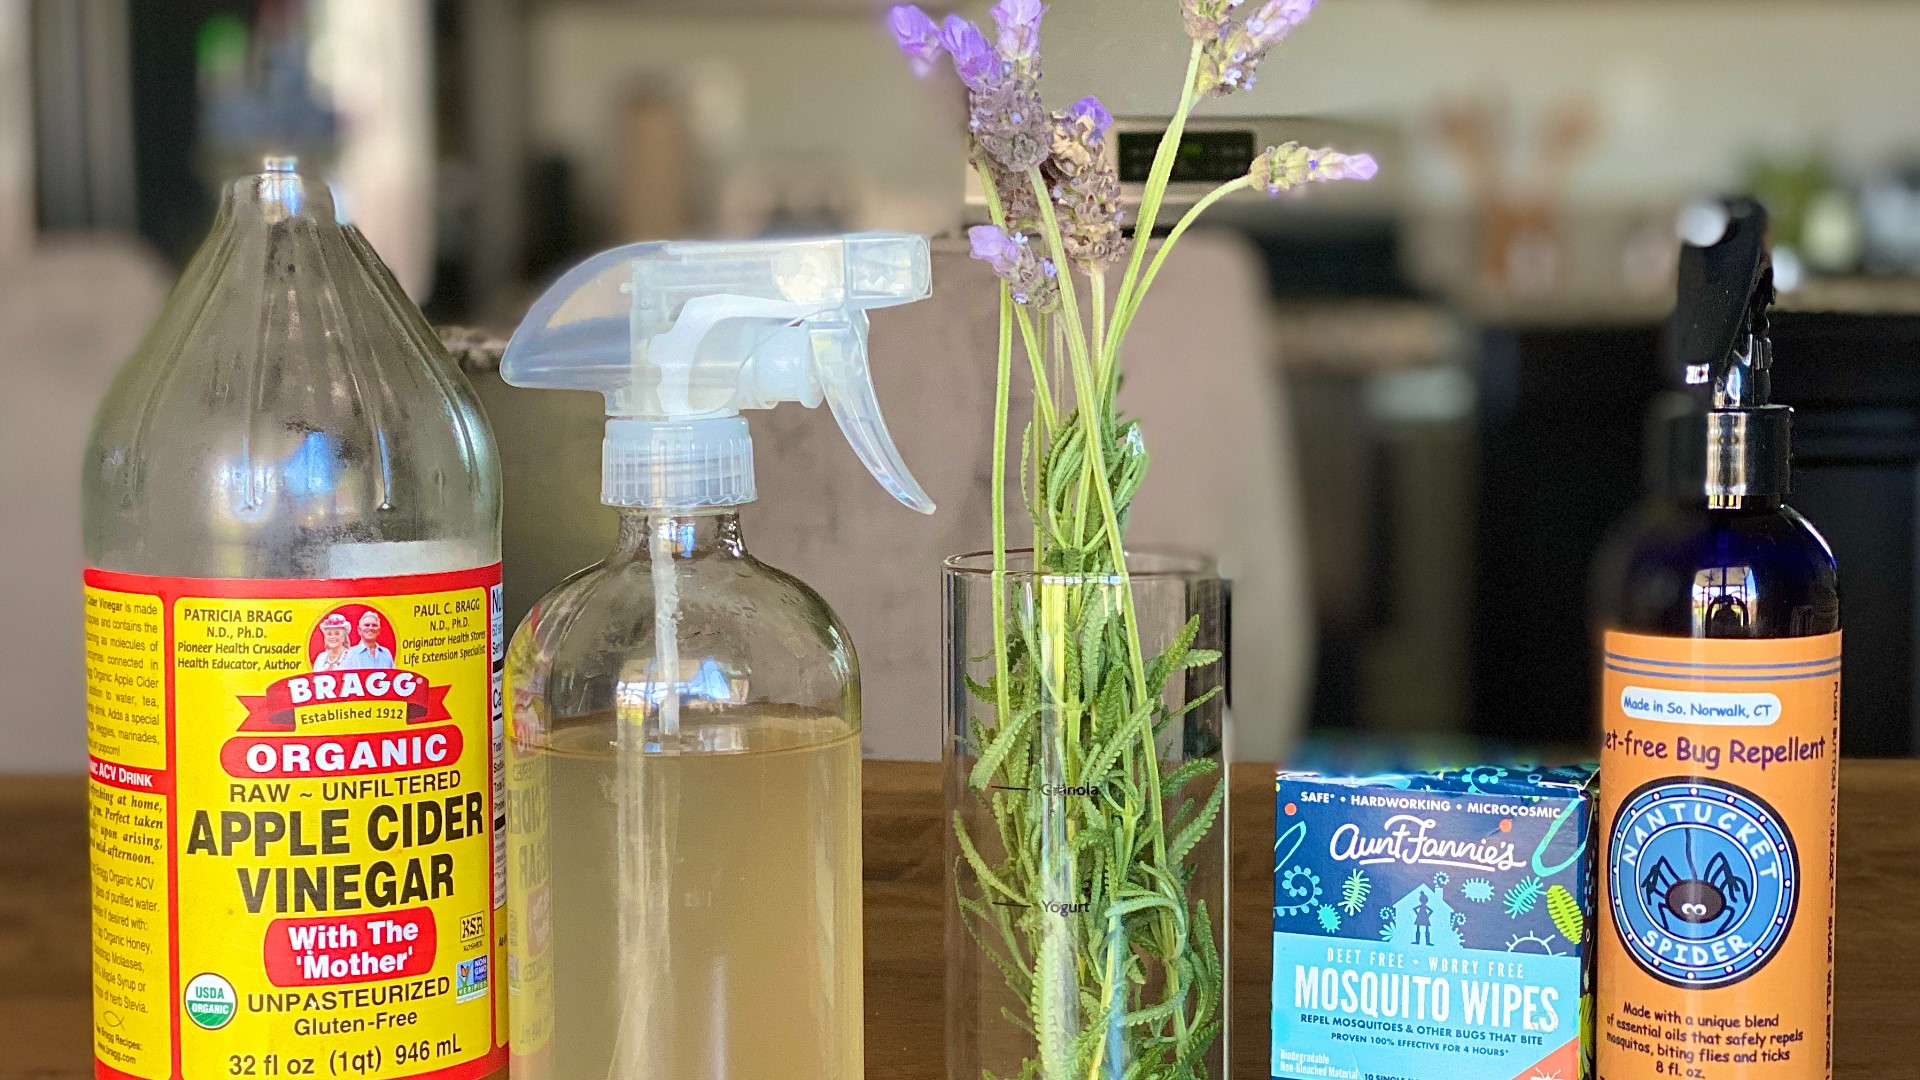 Instead of reaching for a product with chemicals, Megan Evans shares some more natural remedies that are better for your health and children.